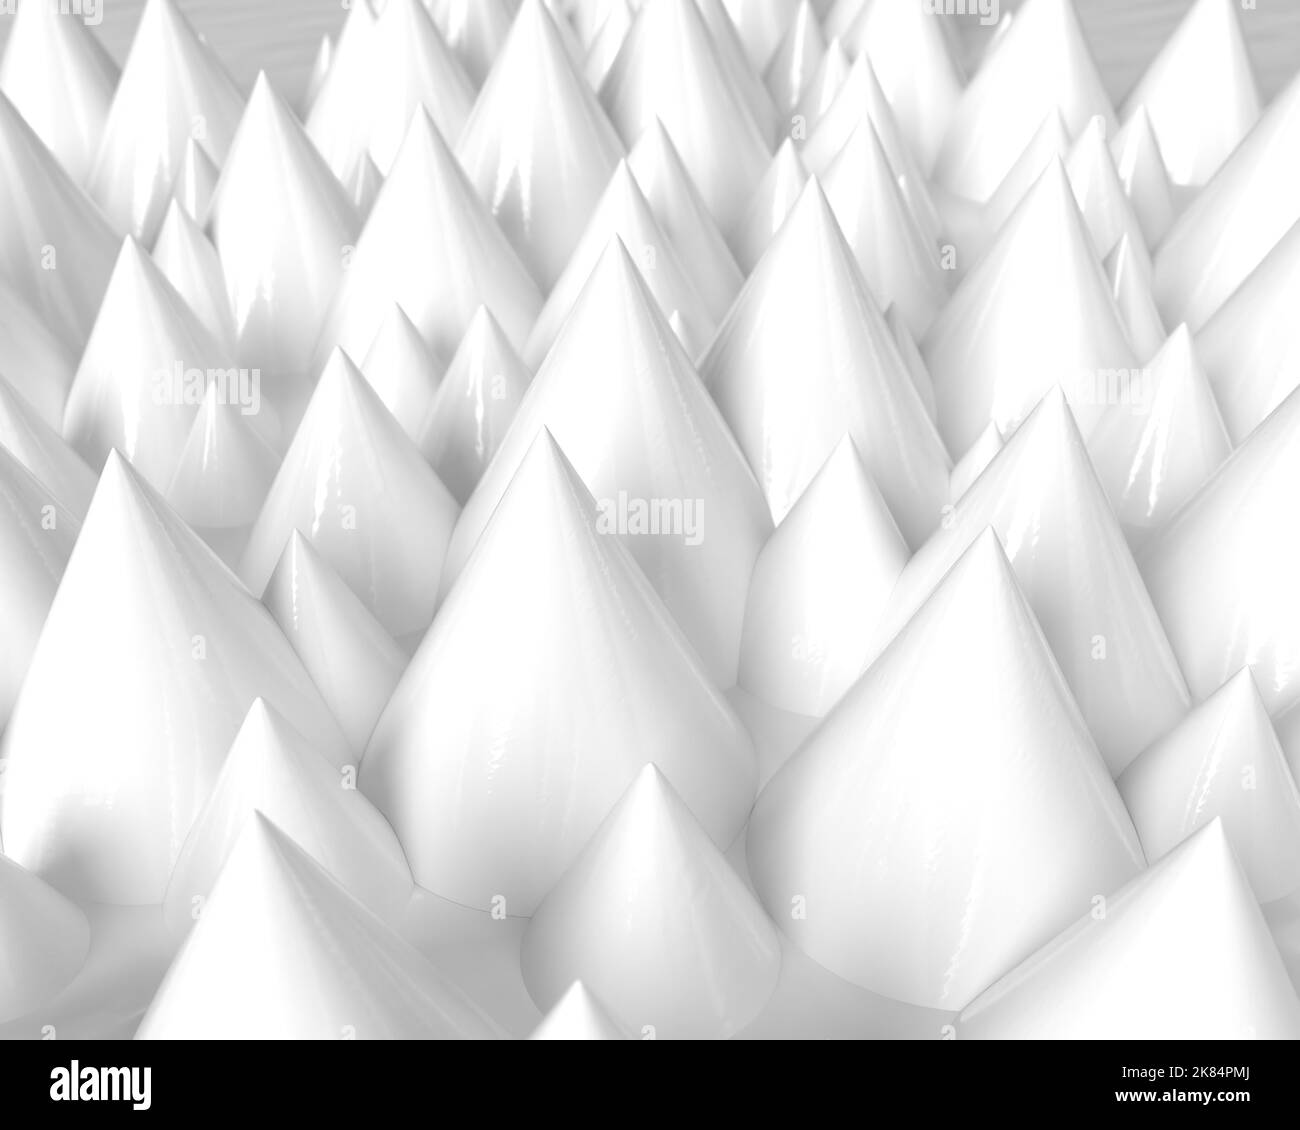 Three dimensional model. Pointed white peaks. Stock Photo